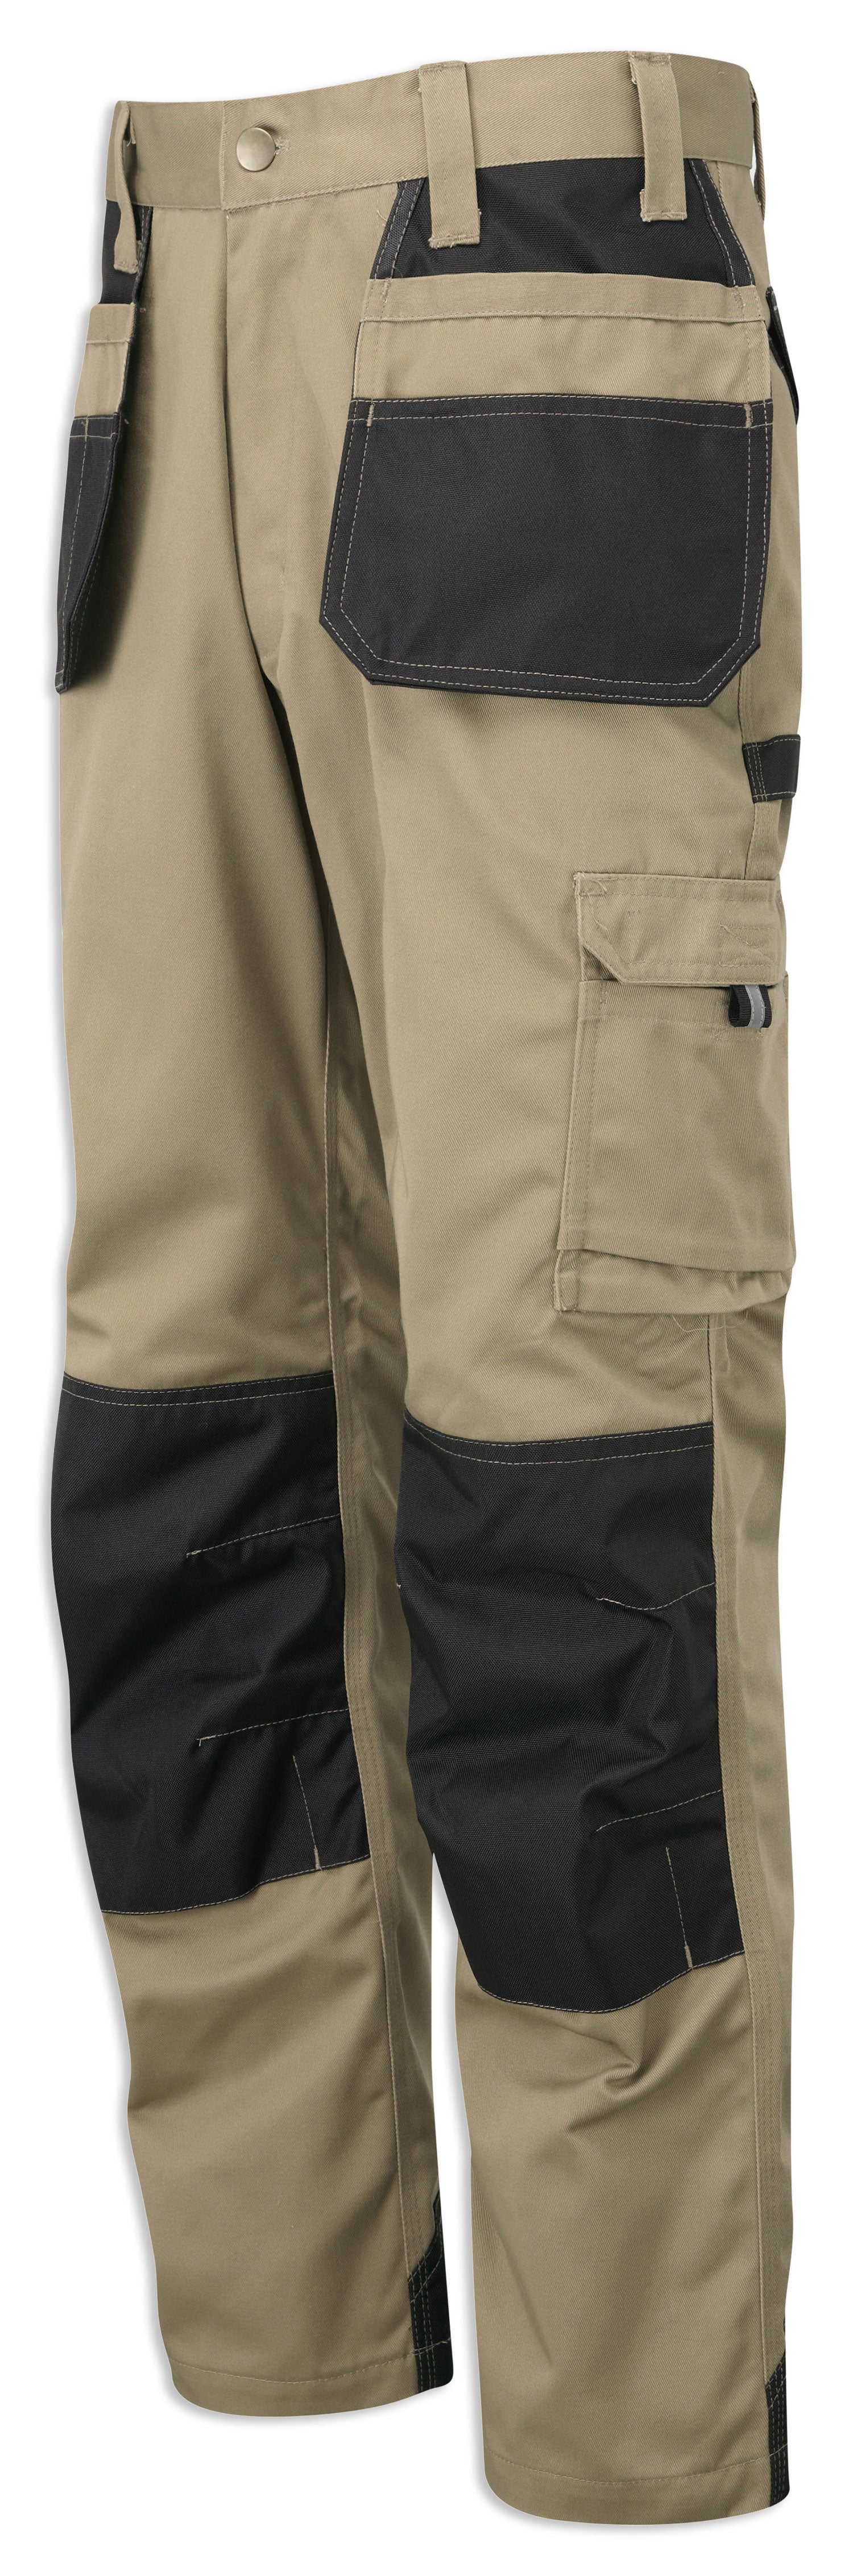 Stone Castle Tuffstuff Excel Work Trousers